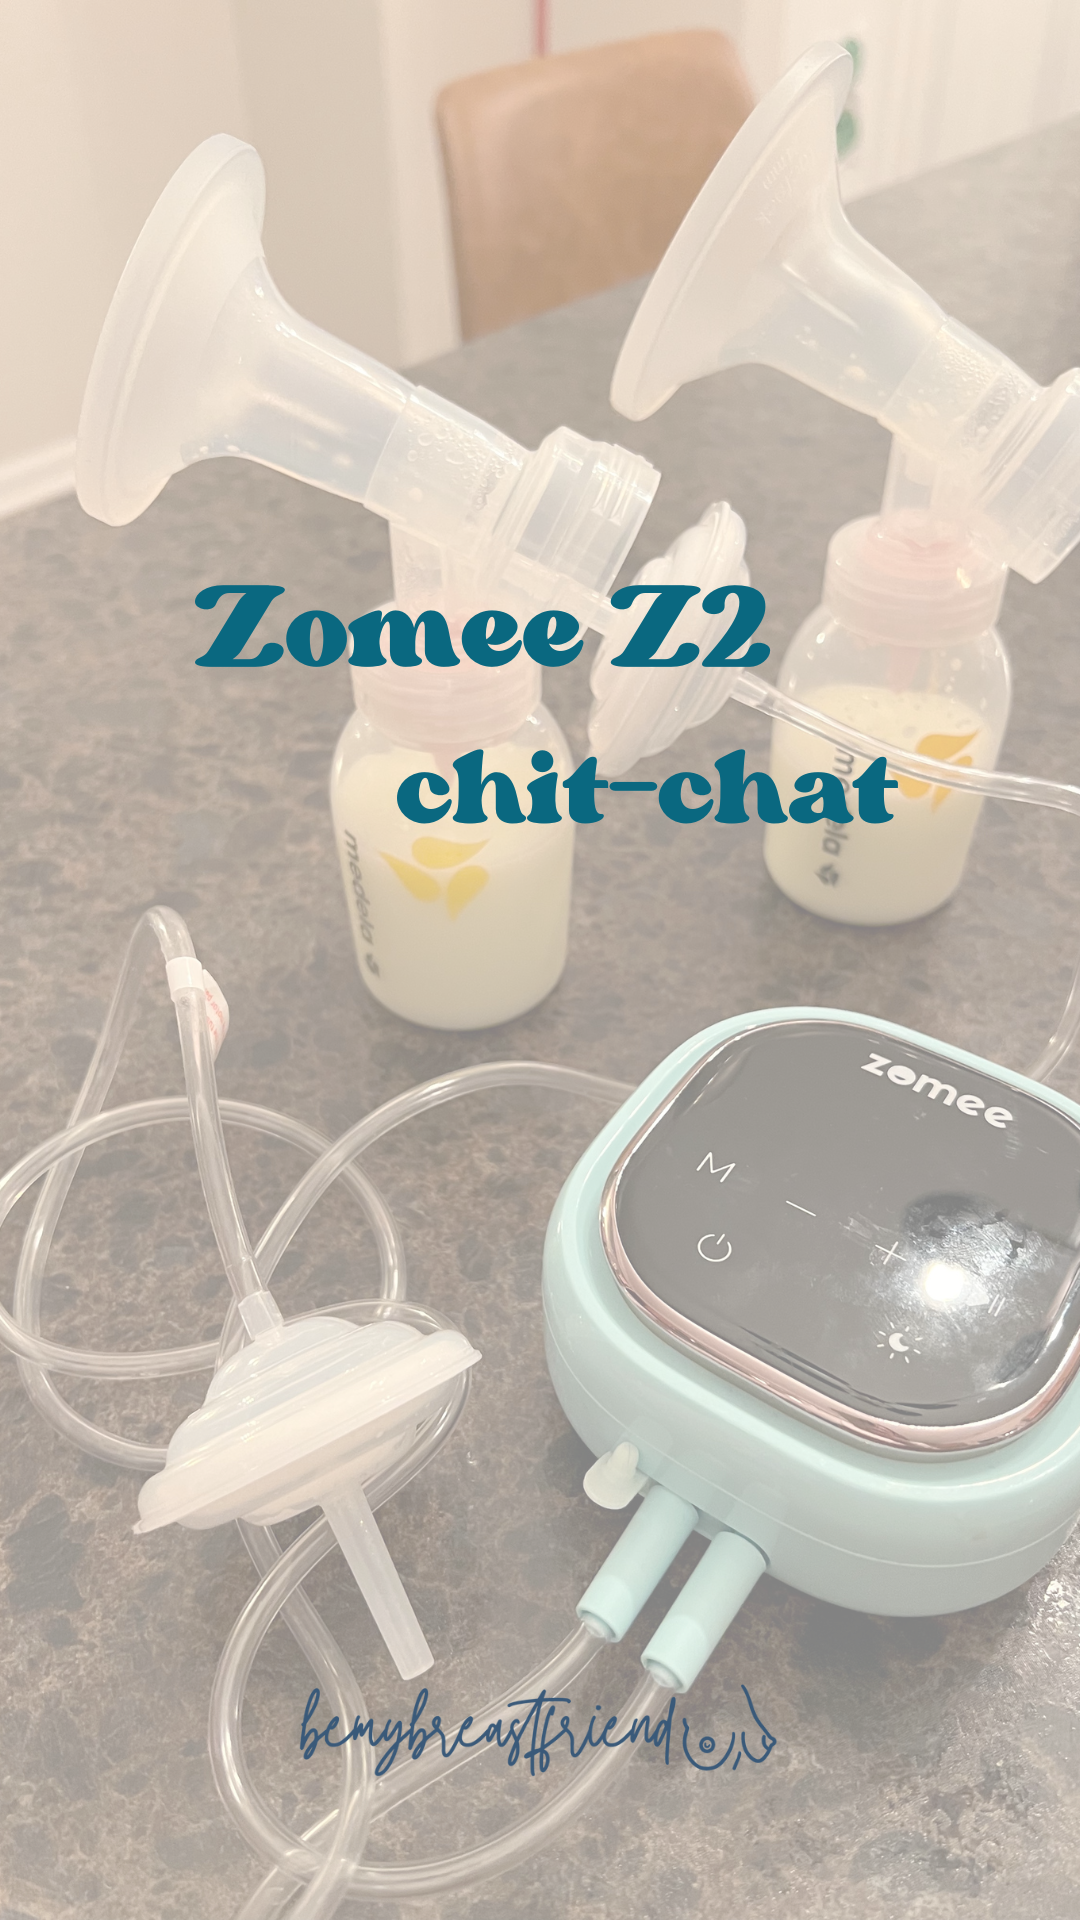 Zomee Z2 chit-chat